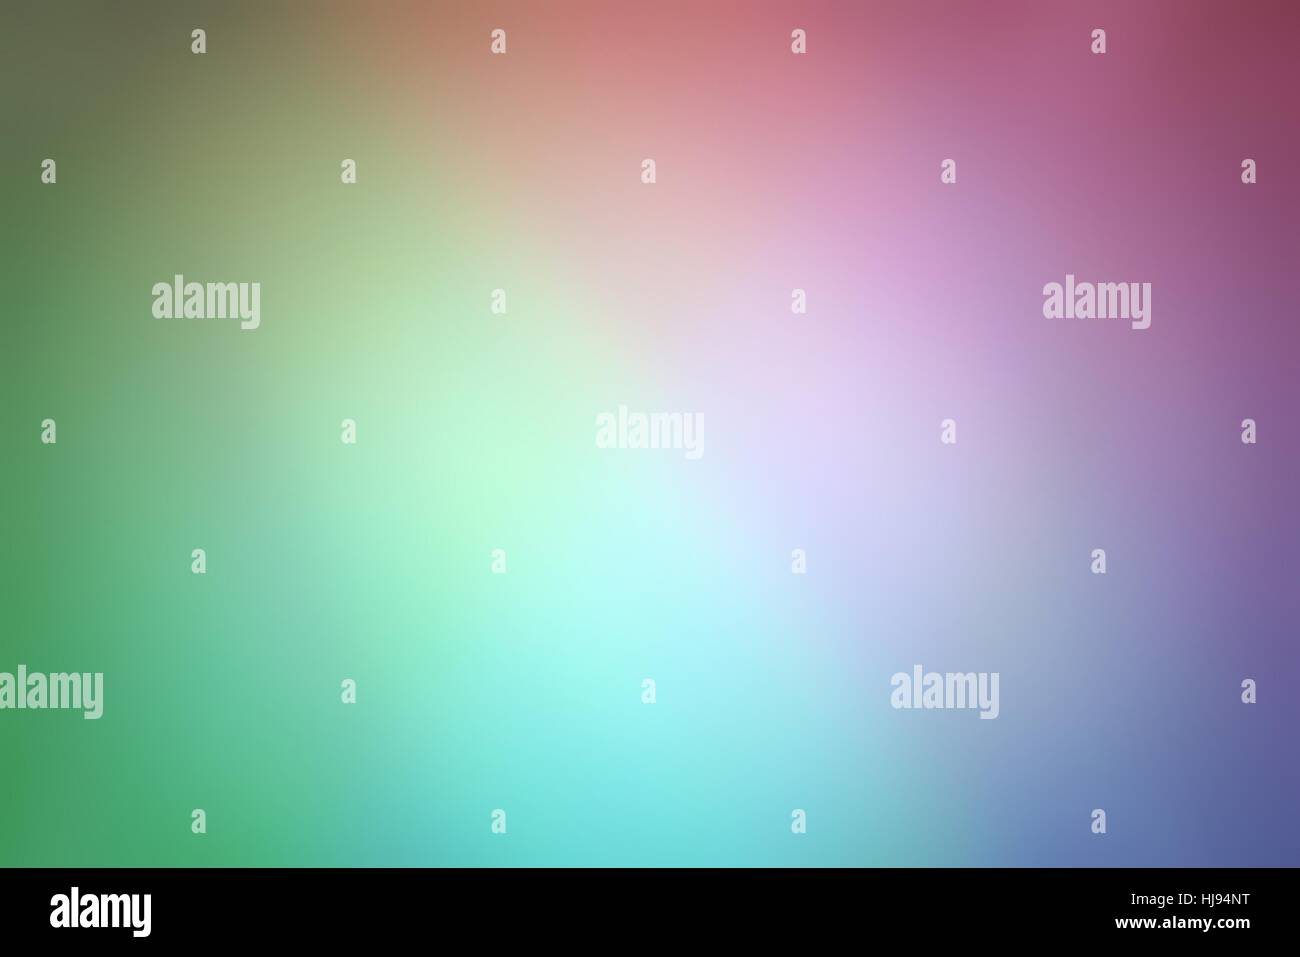 Gradient background of color transitions Stock Photo